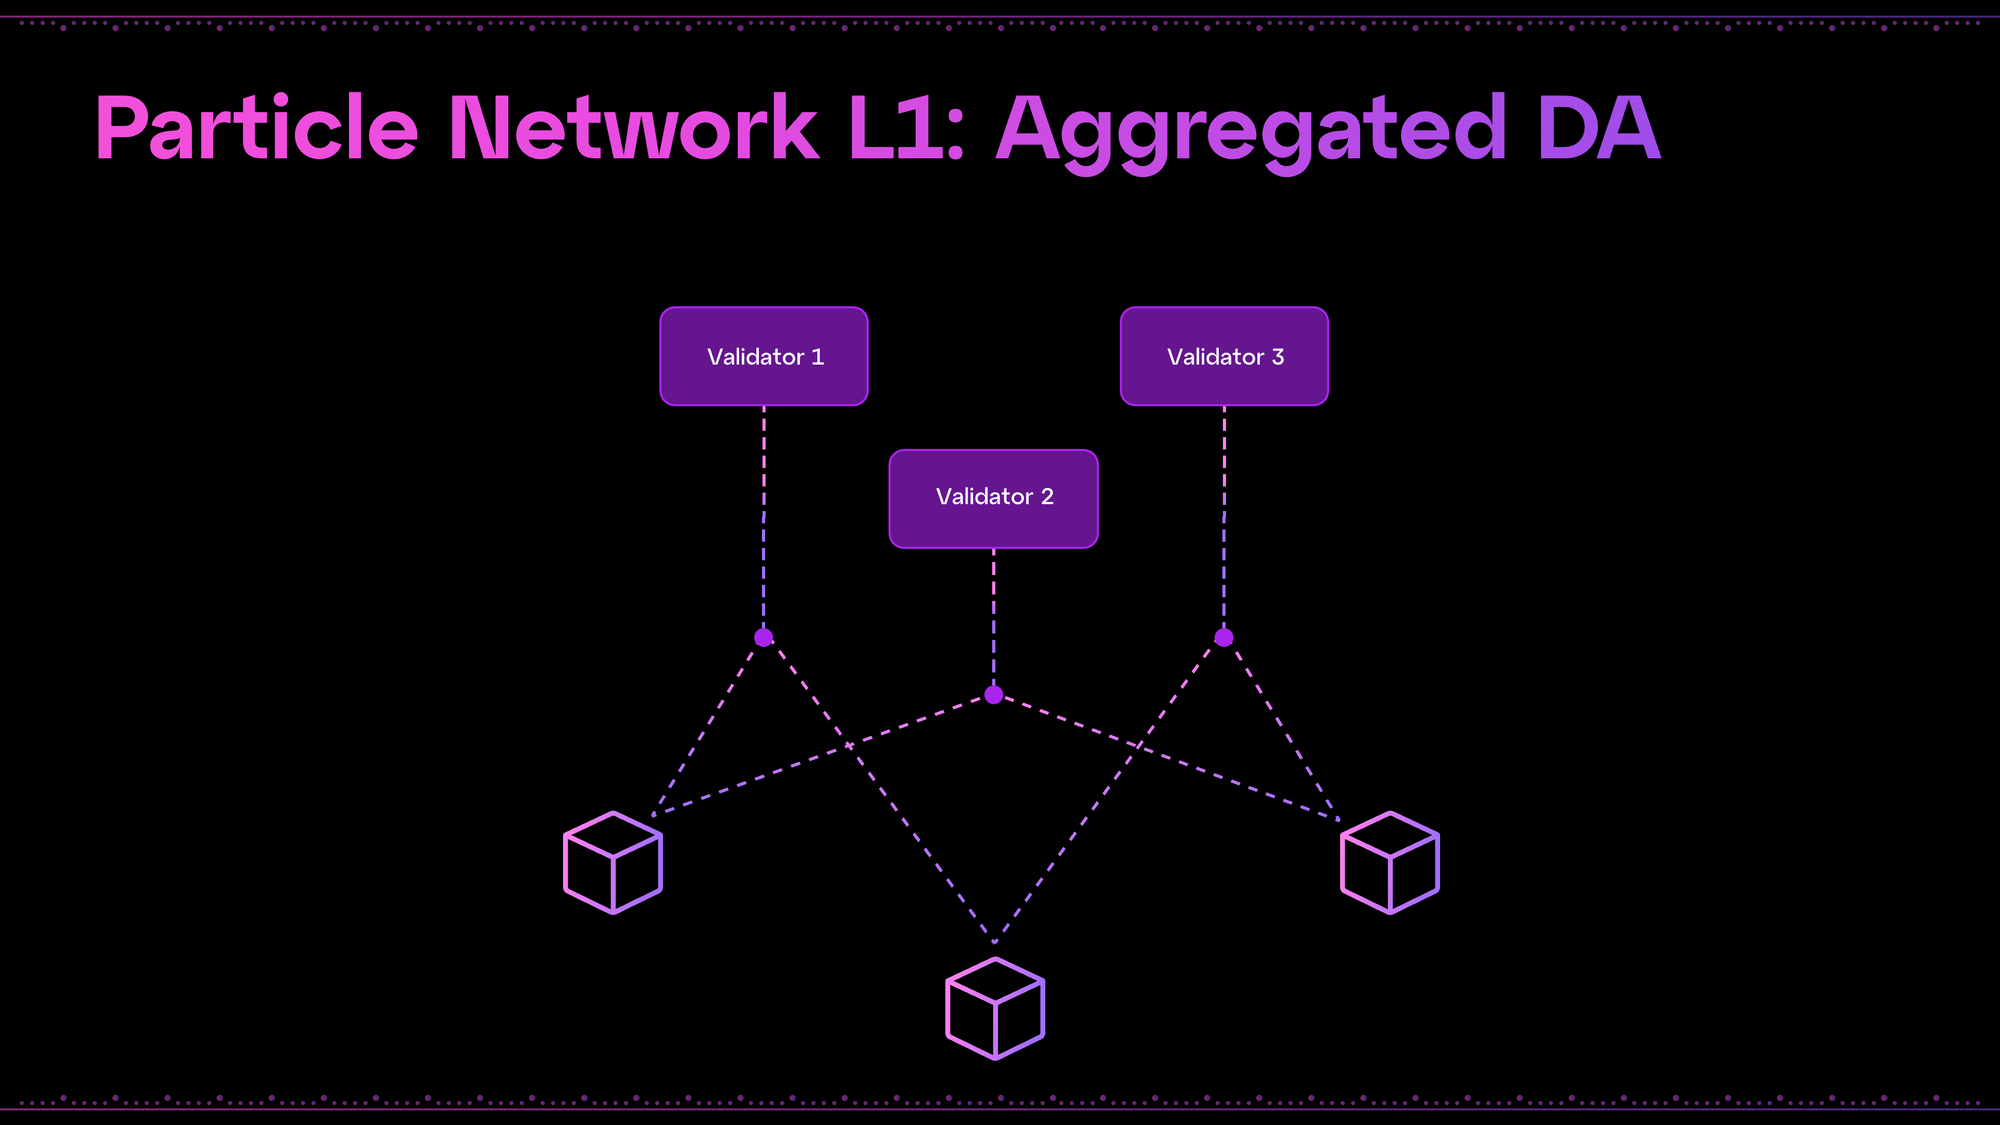 The Modular L1 Powering Chain Abstraction: Particle Network